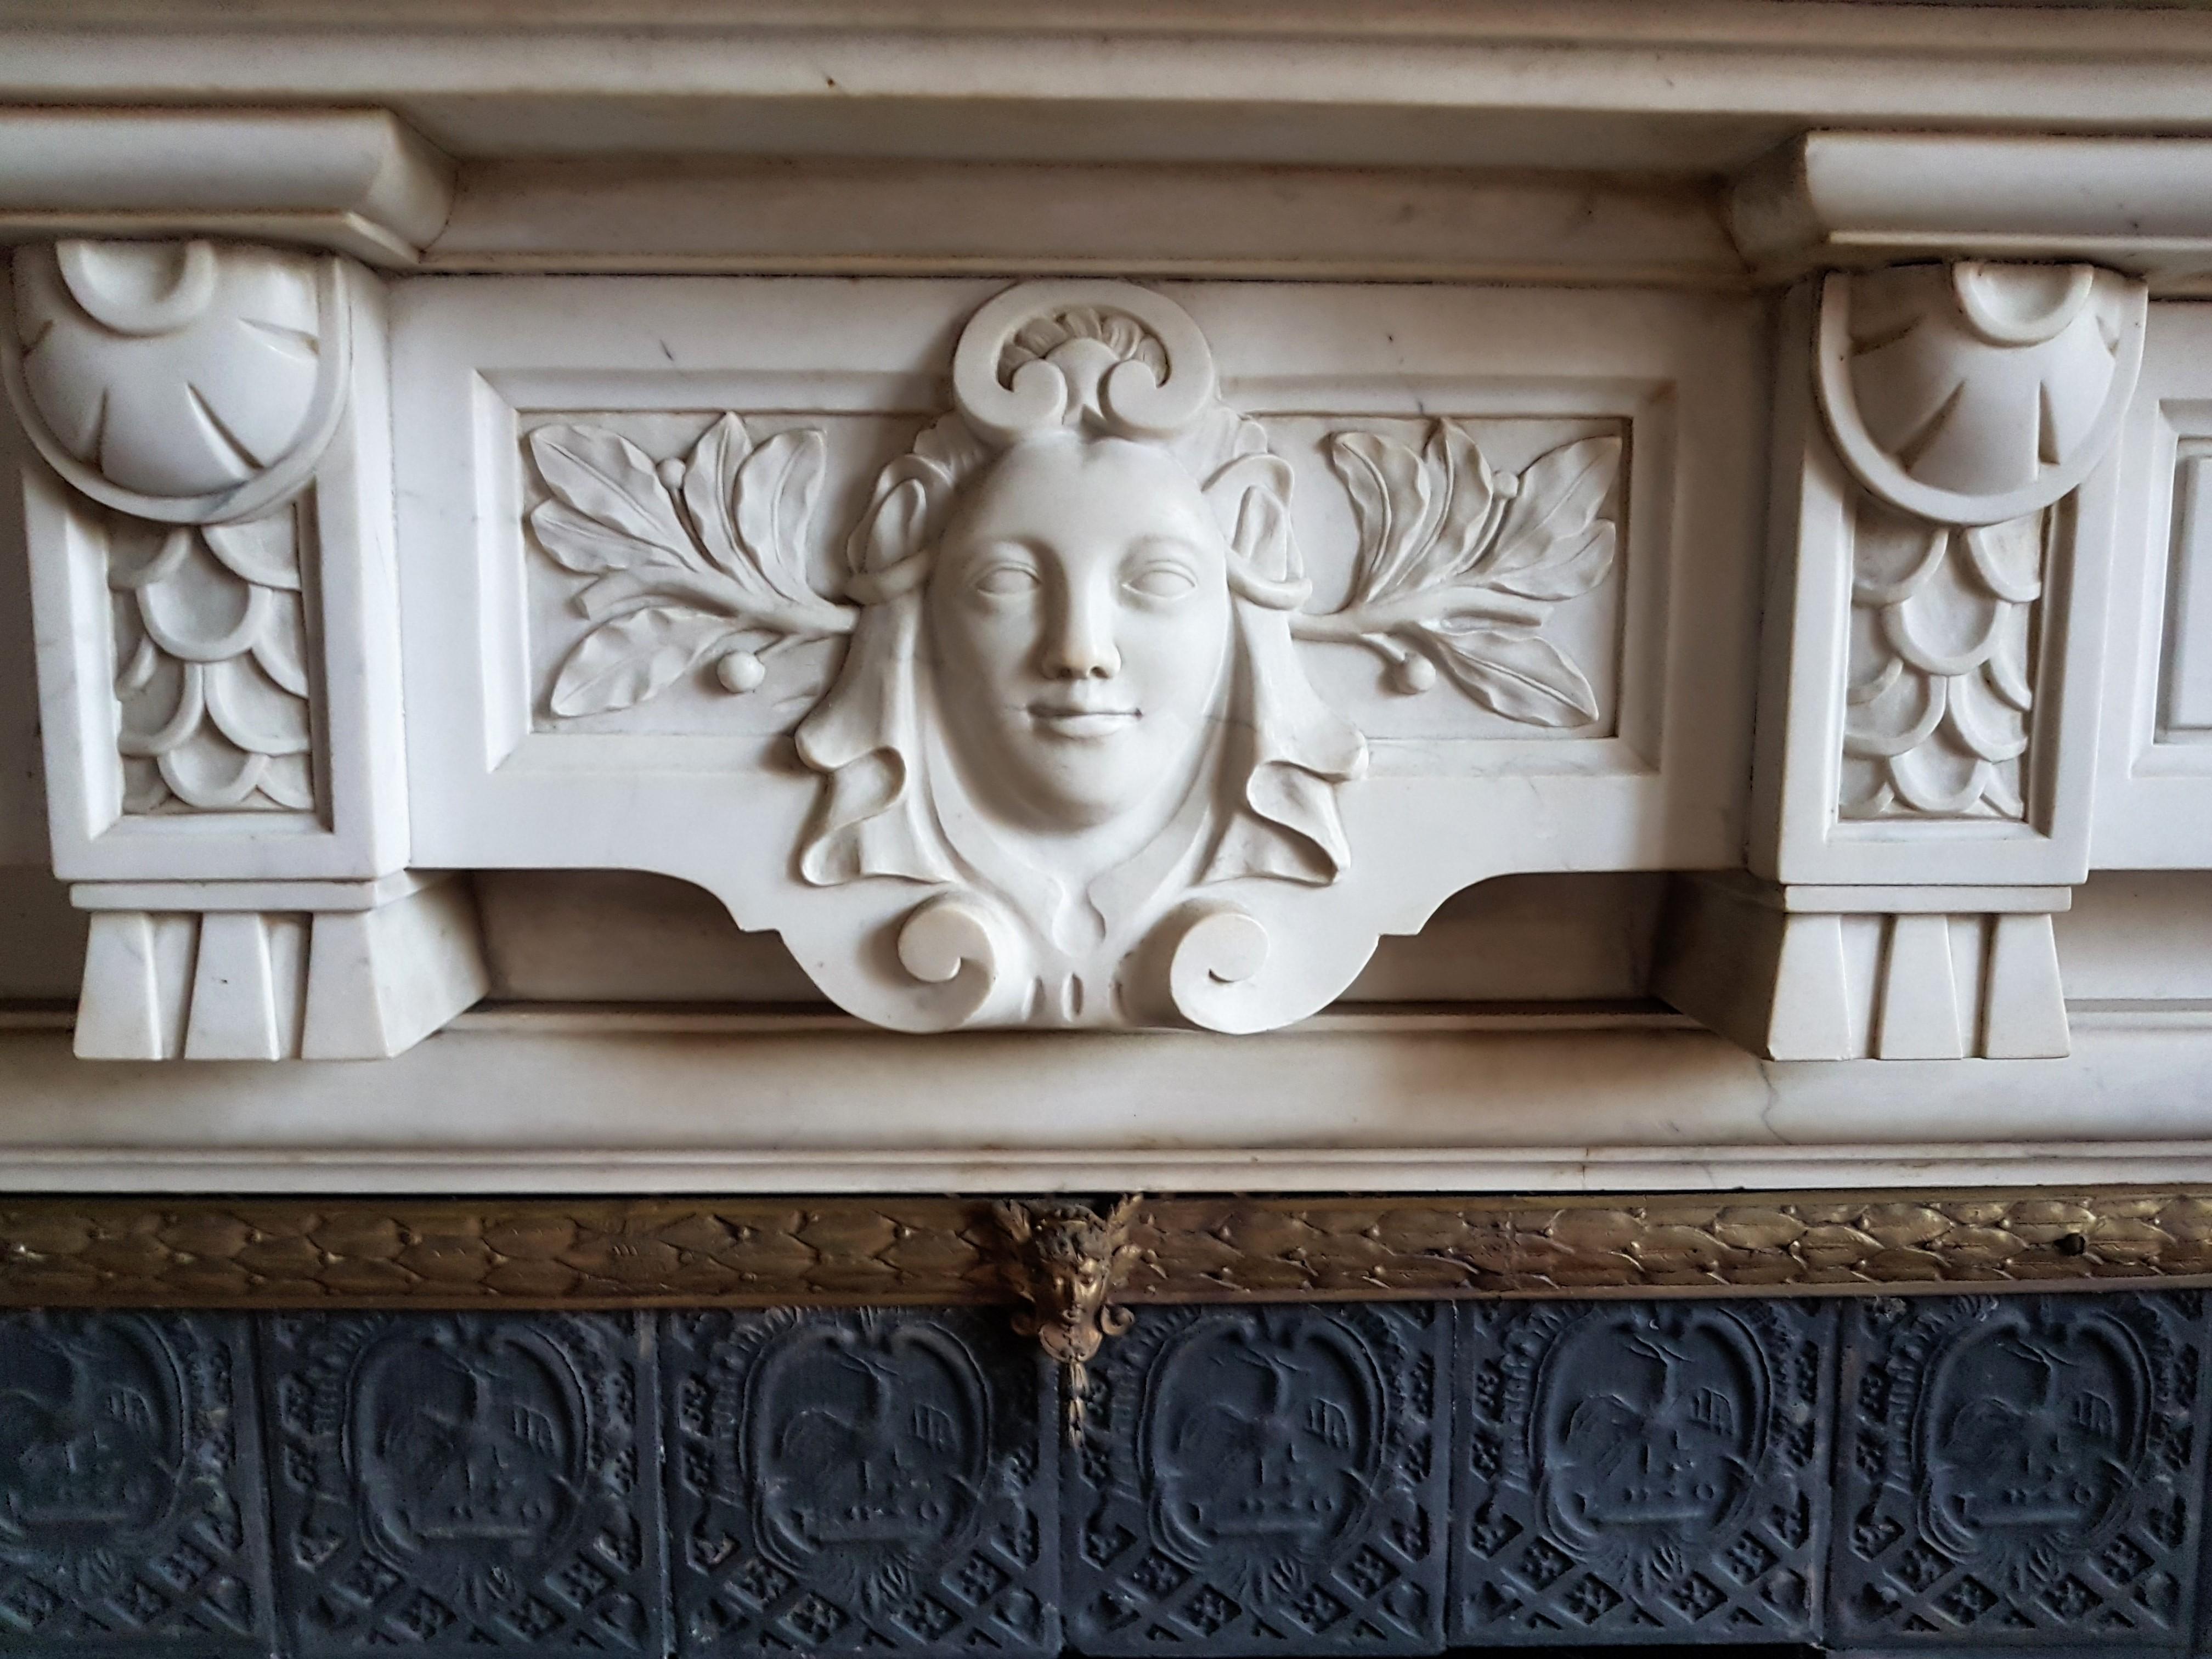 This is a sophisticated, neo-classic fireplace, made of the most soft-toned Carrara marble, named Statuary.
The breakfront frieze is centered with an elegant female-head.  This modest mantel is an example of a fireplace that brings a great sense
of